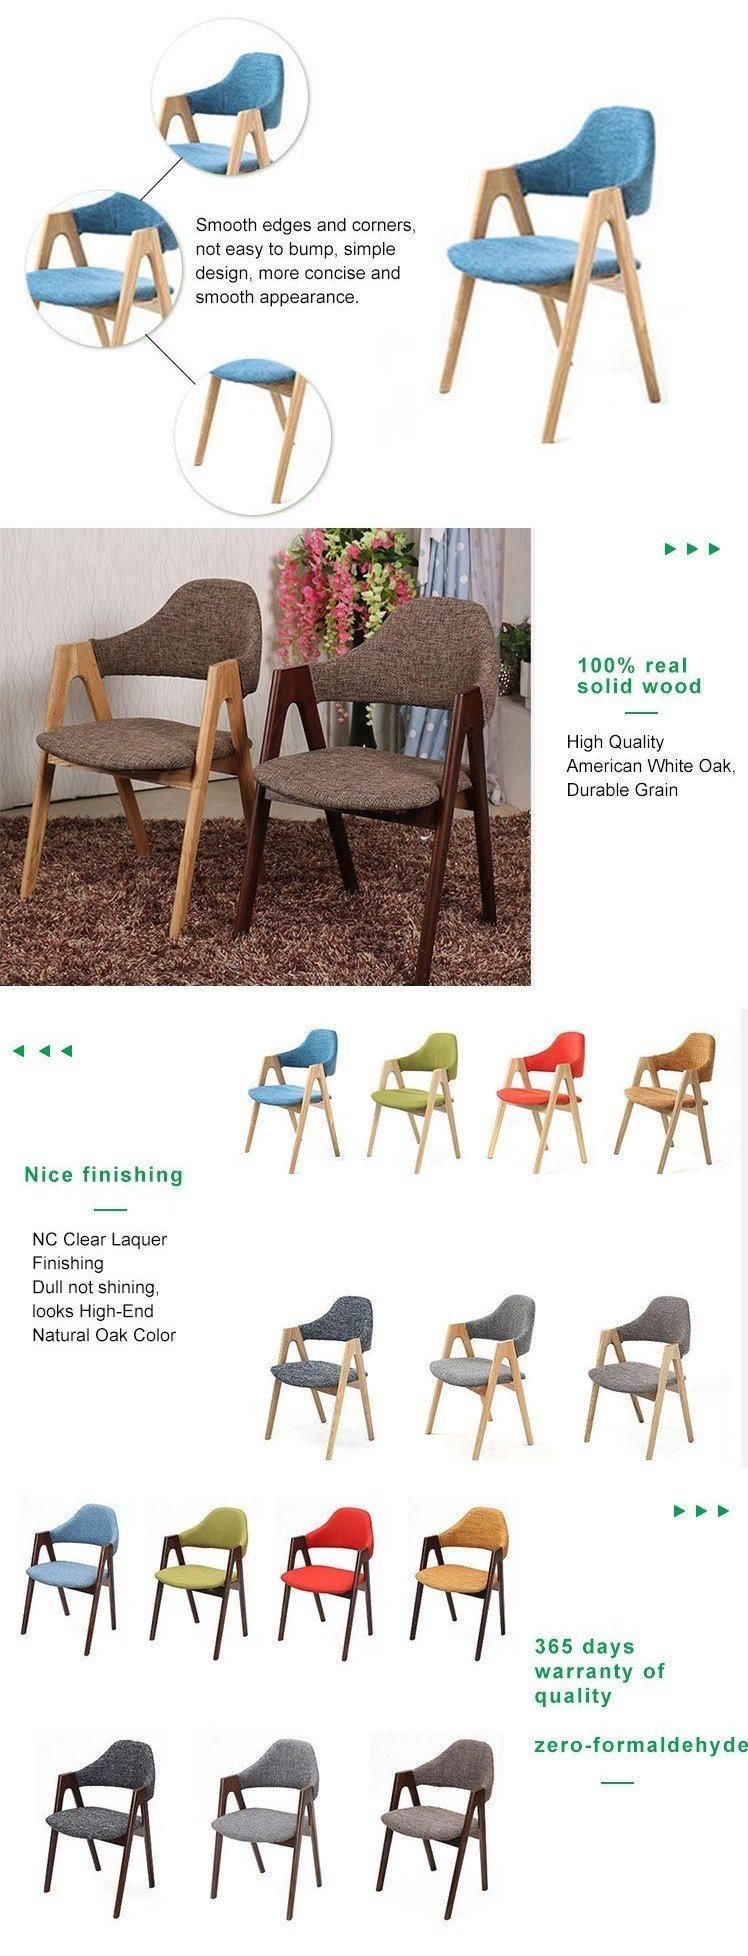 Furniture Modern Furniture Chair Home Furniture Wooden Furniture New Design PU Leather Solid Wood Grace Home Furniture Brown Legs Dining Room Chair with Arm